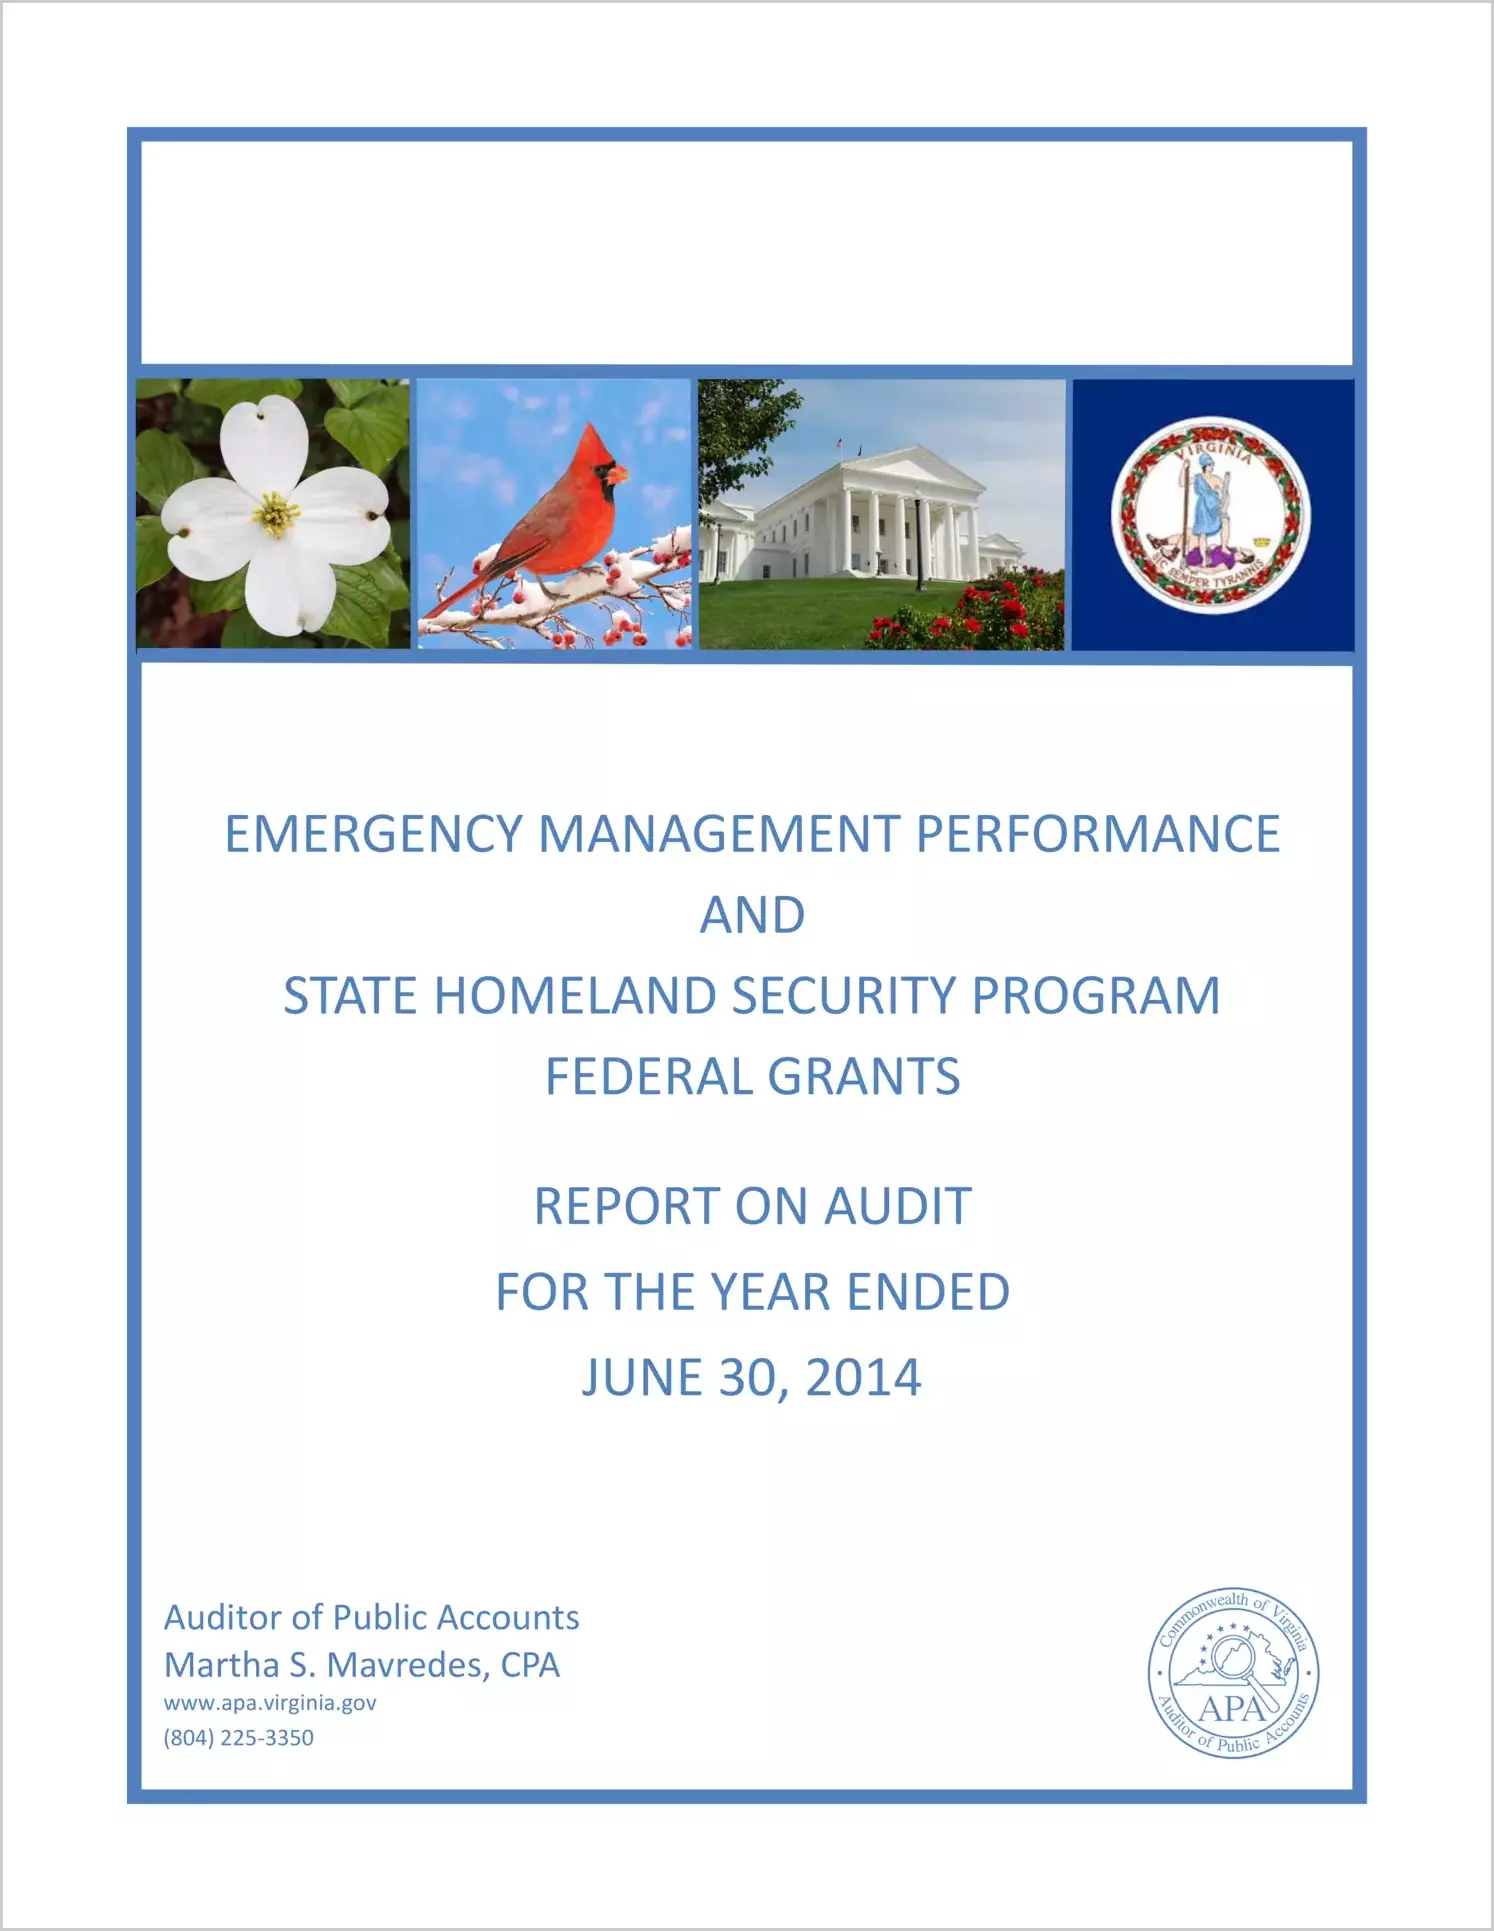 Emergency Management Performance and State Homeland Security Program Federal Grants - Report on Audit for the year ended June 30, 2014